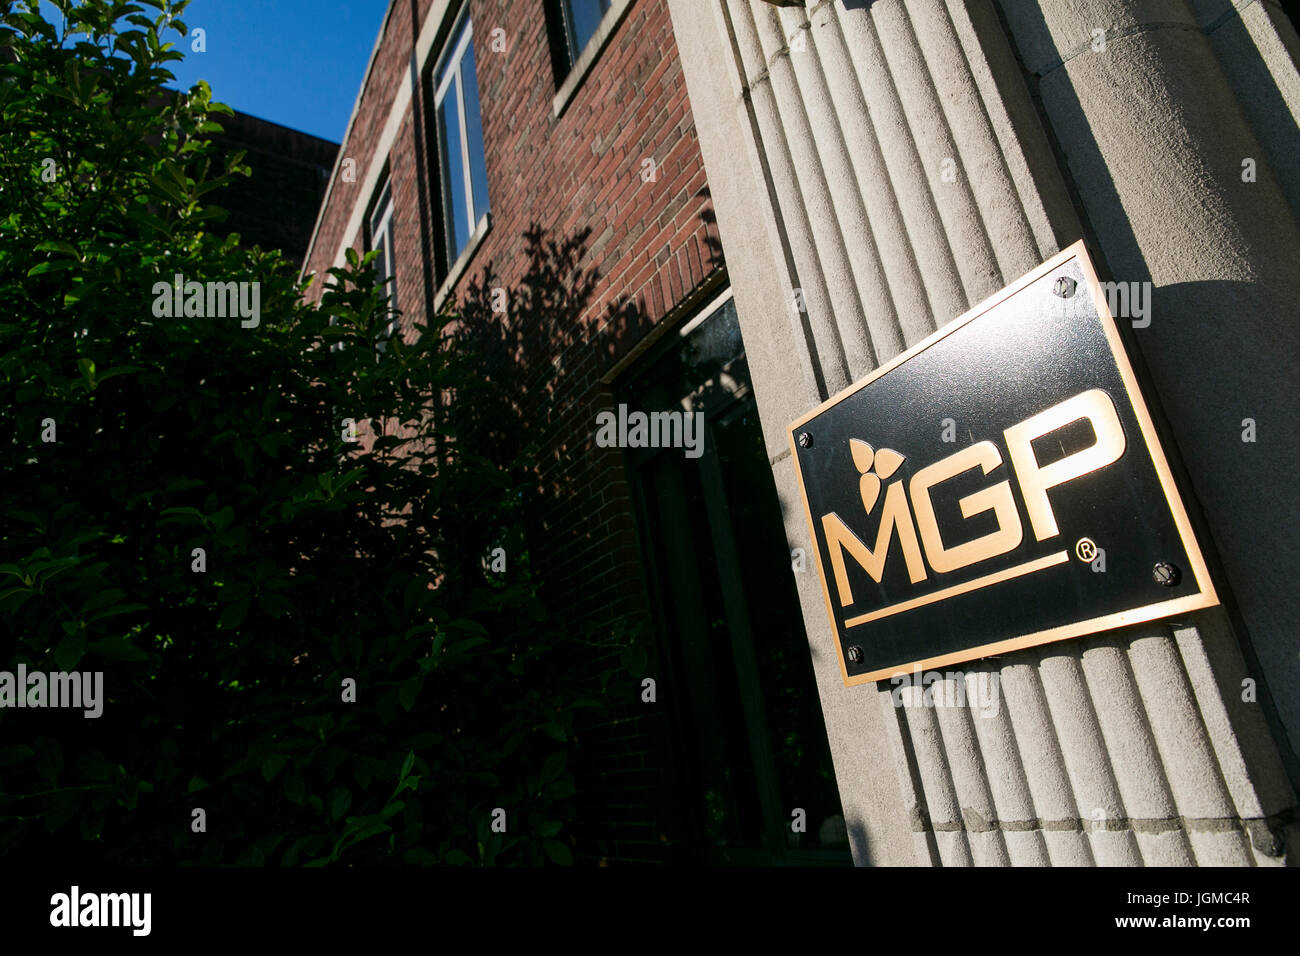 A logo sign outside of a facility occupied by MGP Ingredients, Inc., also known as Midwest Grain Products, in Lawrenceburg, Indiana on July 2, 2017. Stock Photo